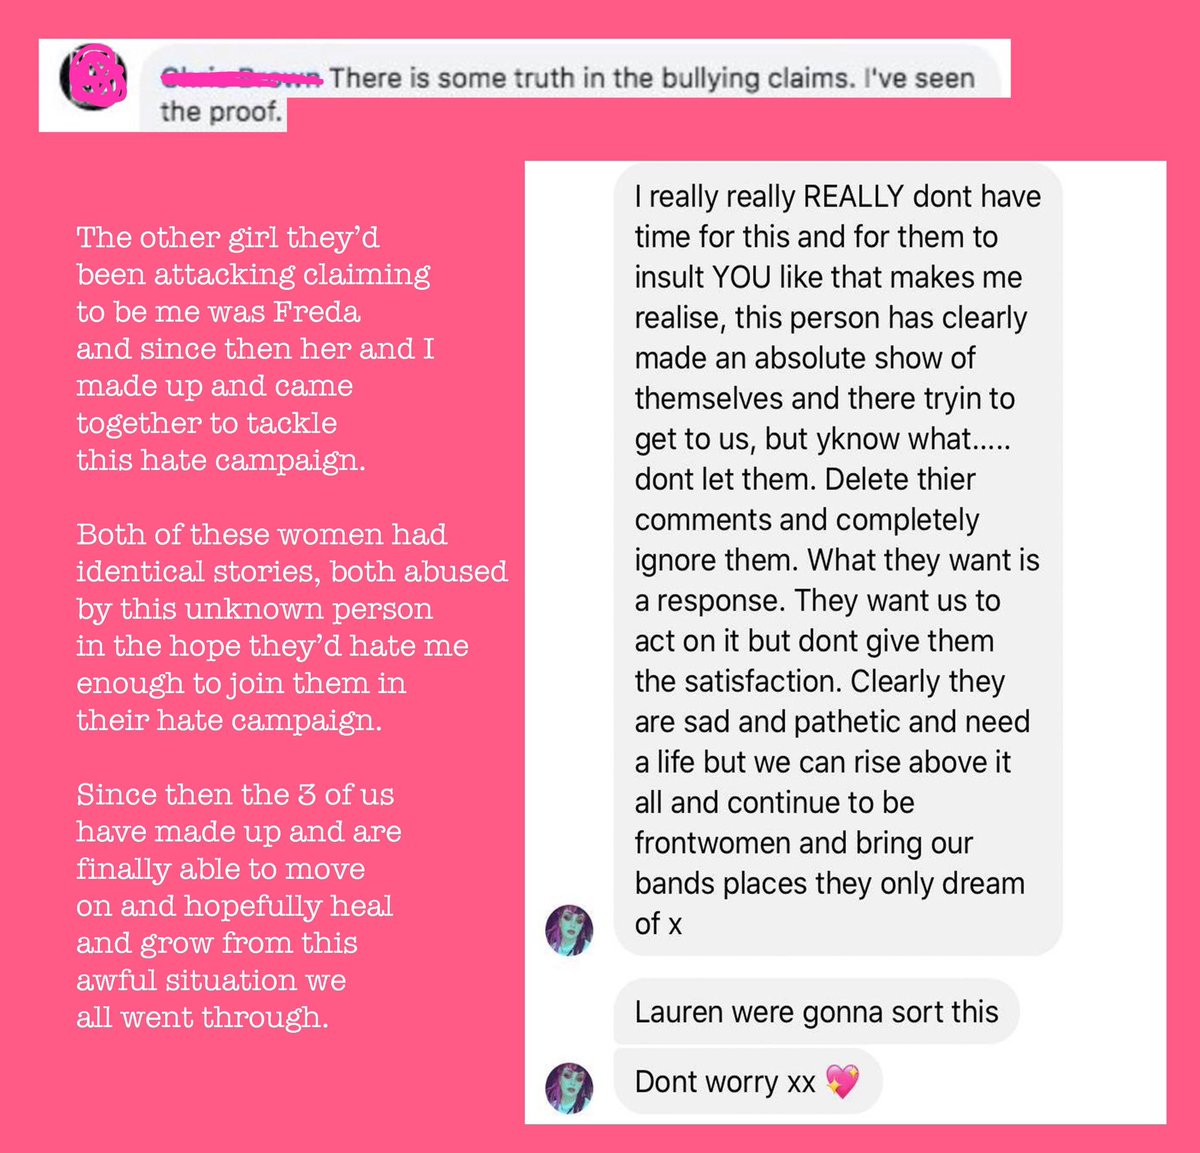 Then here are the 2 girls who were targeted by the accounts posed as me who went through hell because of it. We are now all friends and have been working together to stop this hate campaign once and for all.  #EnoughIsEnough  #bullying  #fake  #abuse  #lies  #accusations